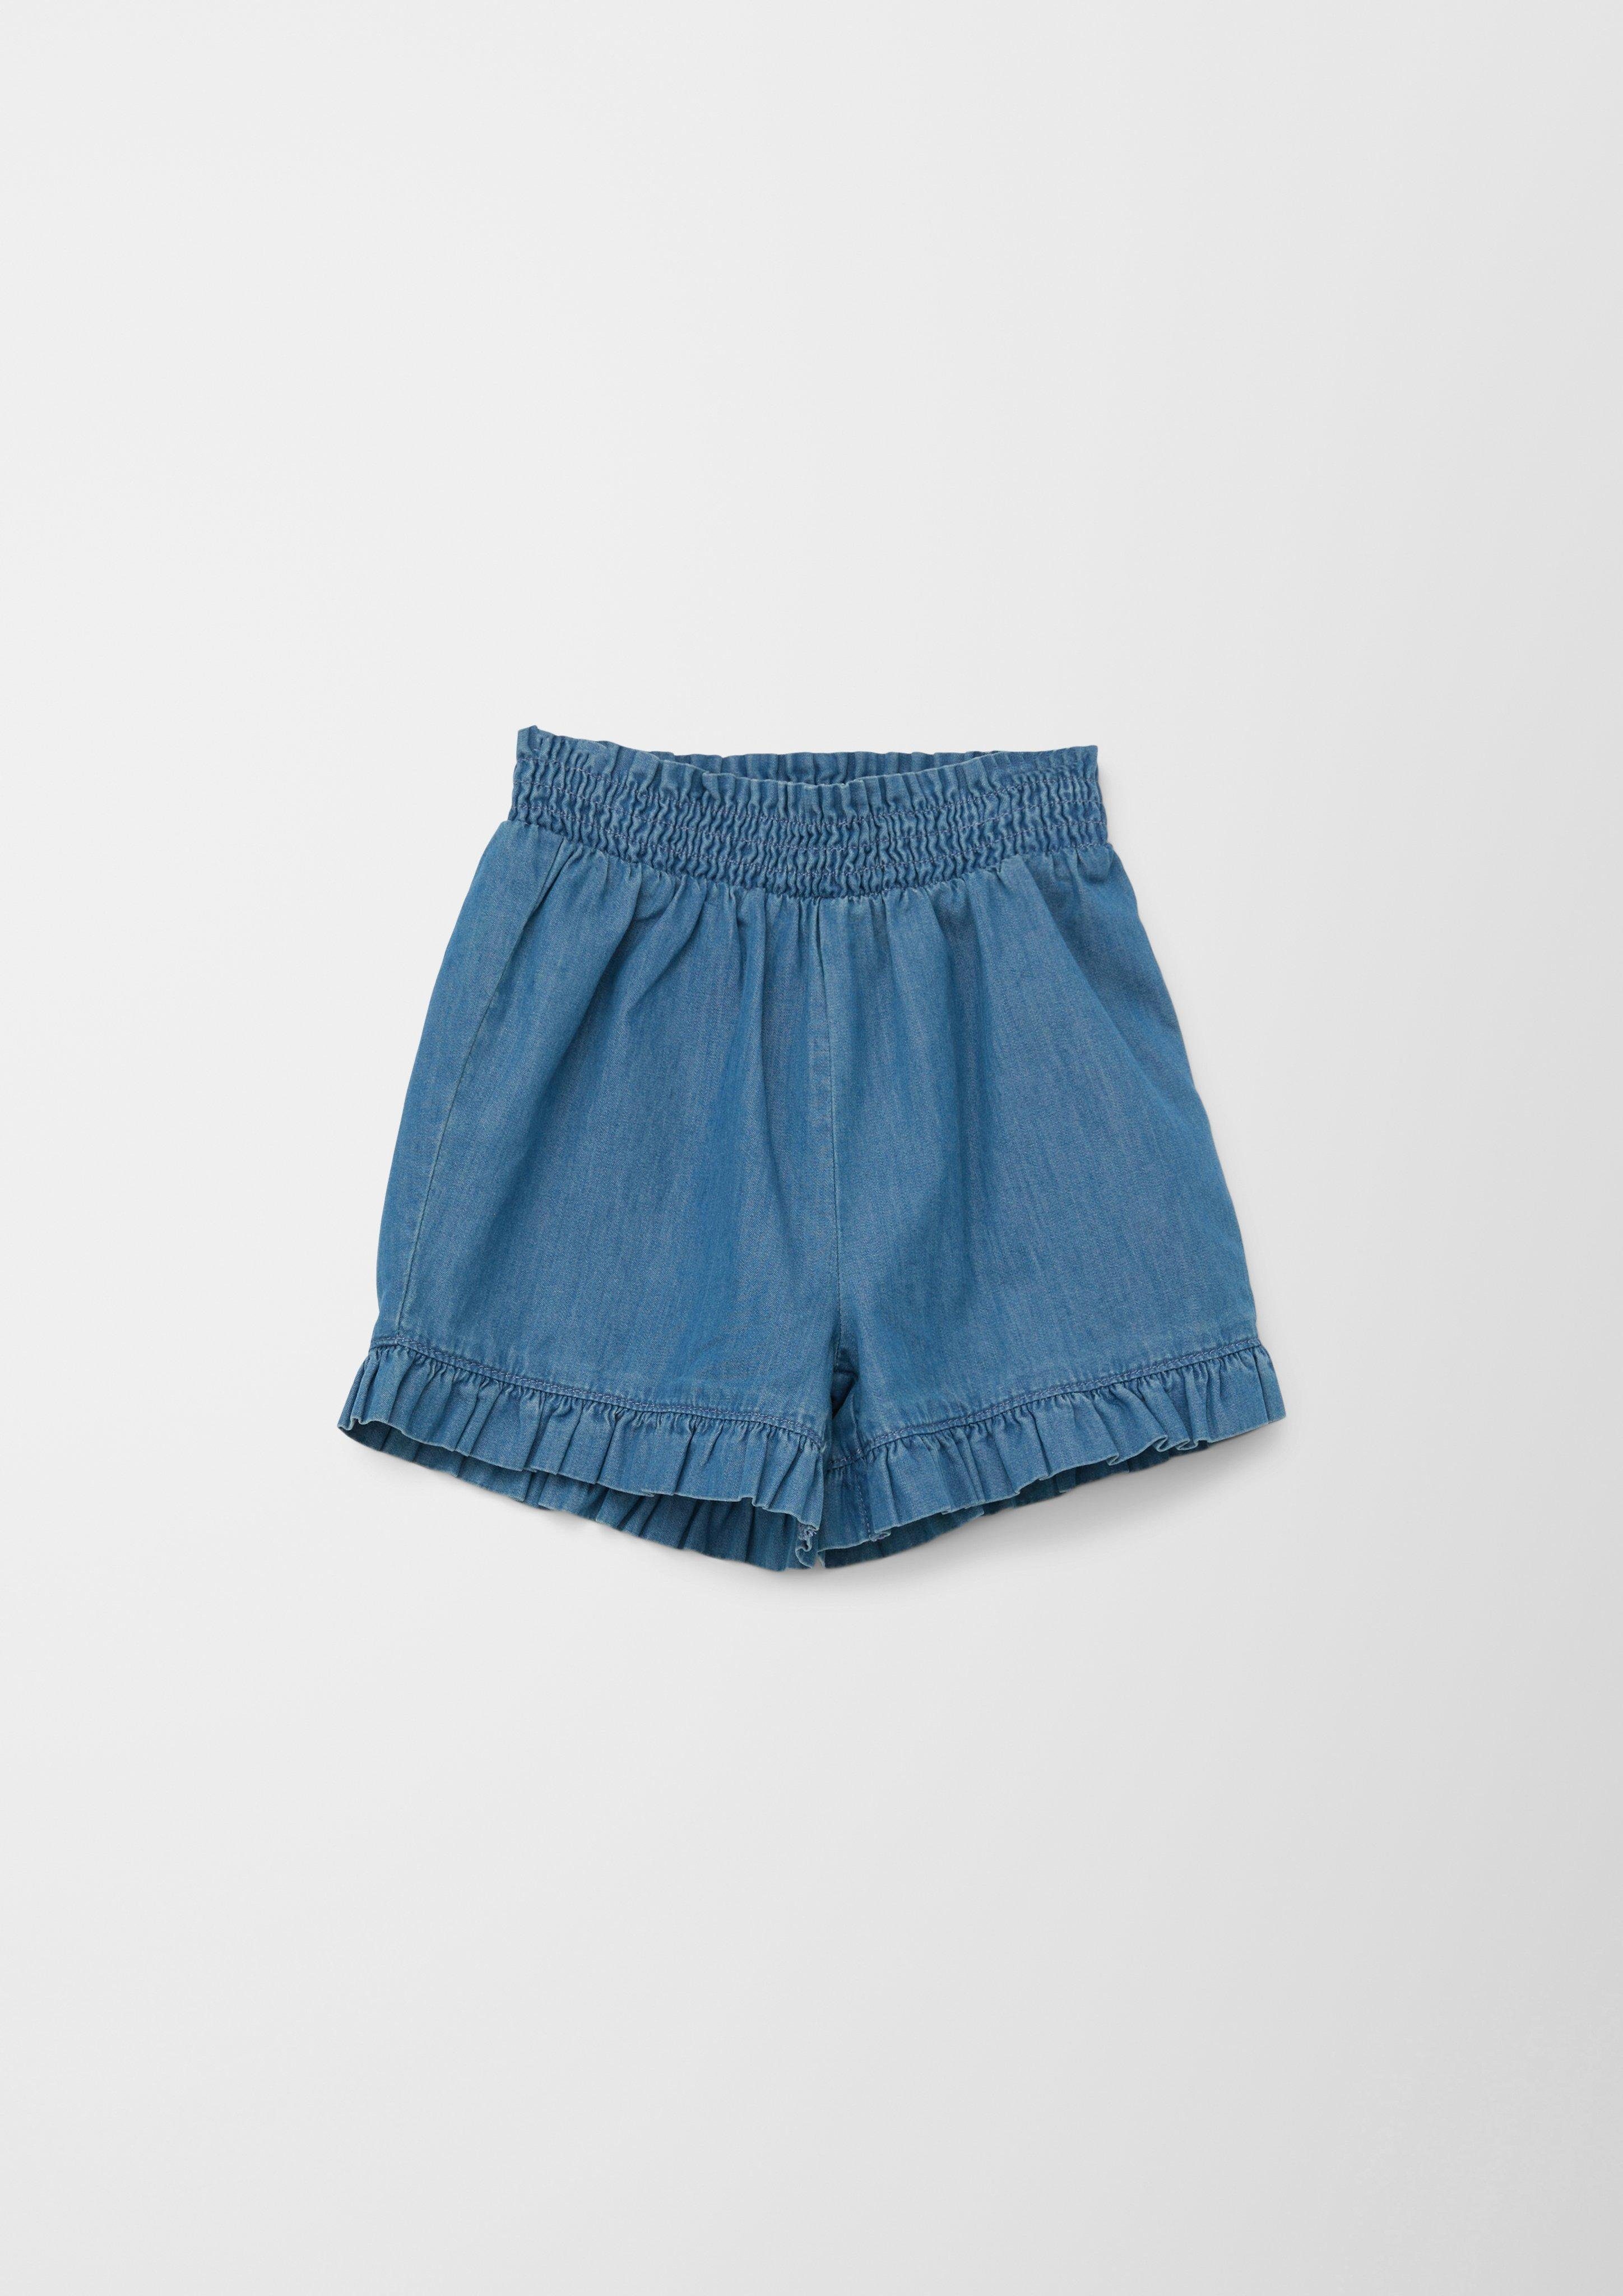 Jeansshorts Jeans-Shorts Smok-Detail Rüschen, Wide Leg Loose Fit Mid / / Rise / s.Oliver